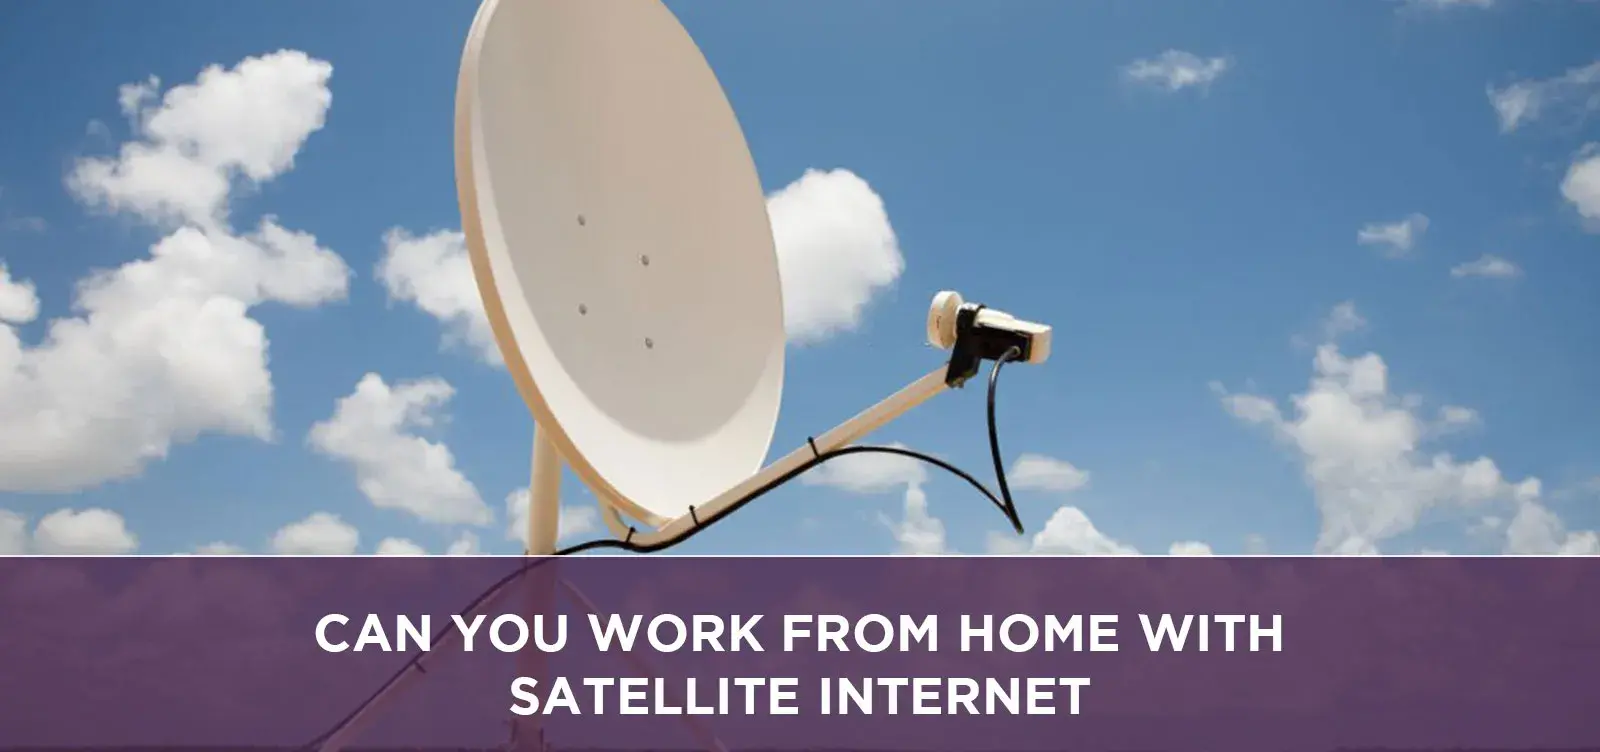 Can You Work From Home With Satellite Internet?